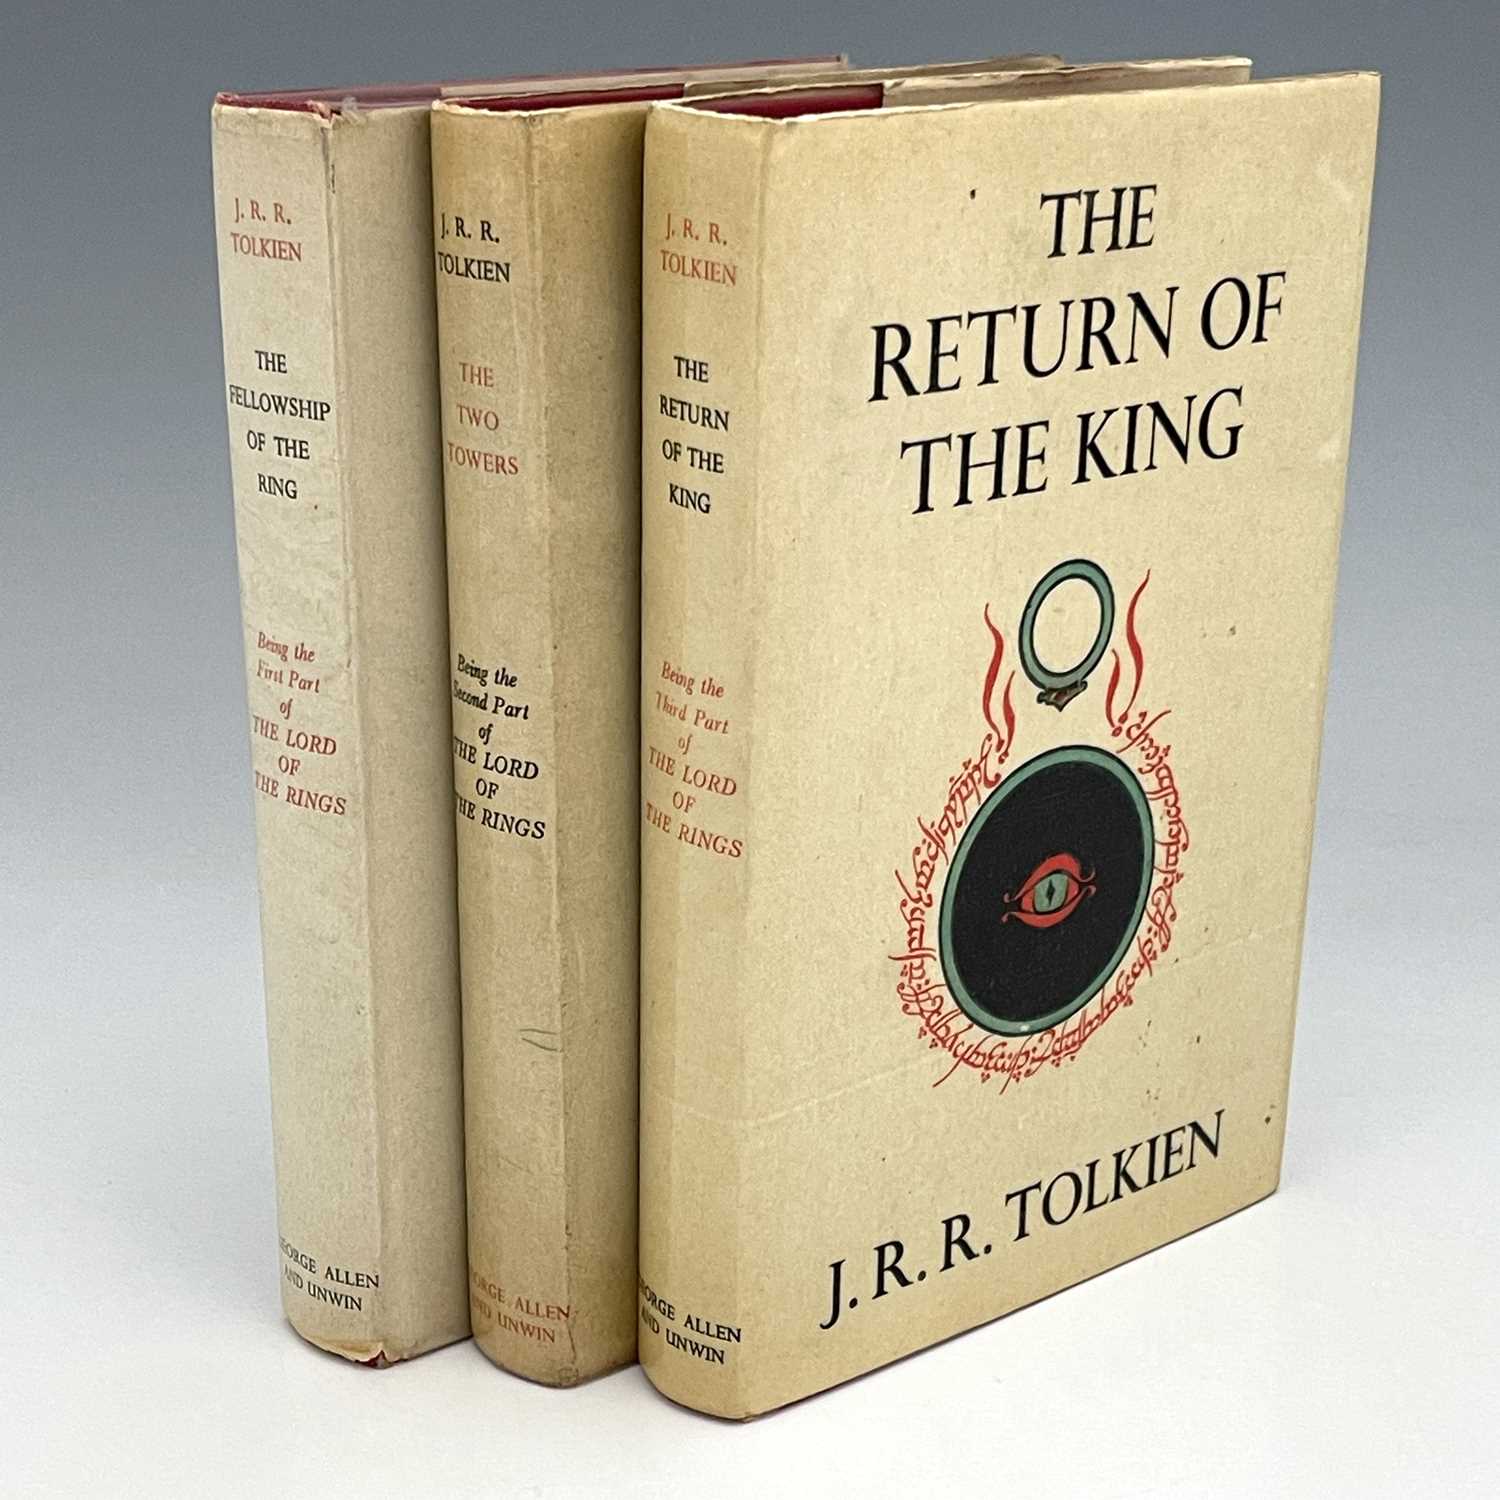 Tolkien, J.R.R. 'The Fellowship of The Ring', 1965, 'The Two Towers', 1965 and 'The Return of The